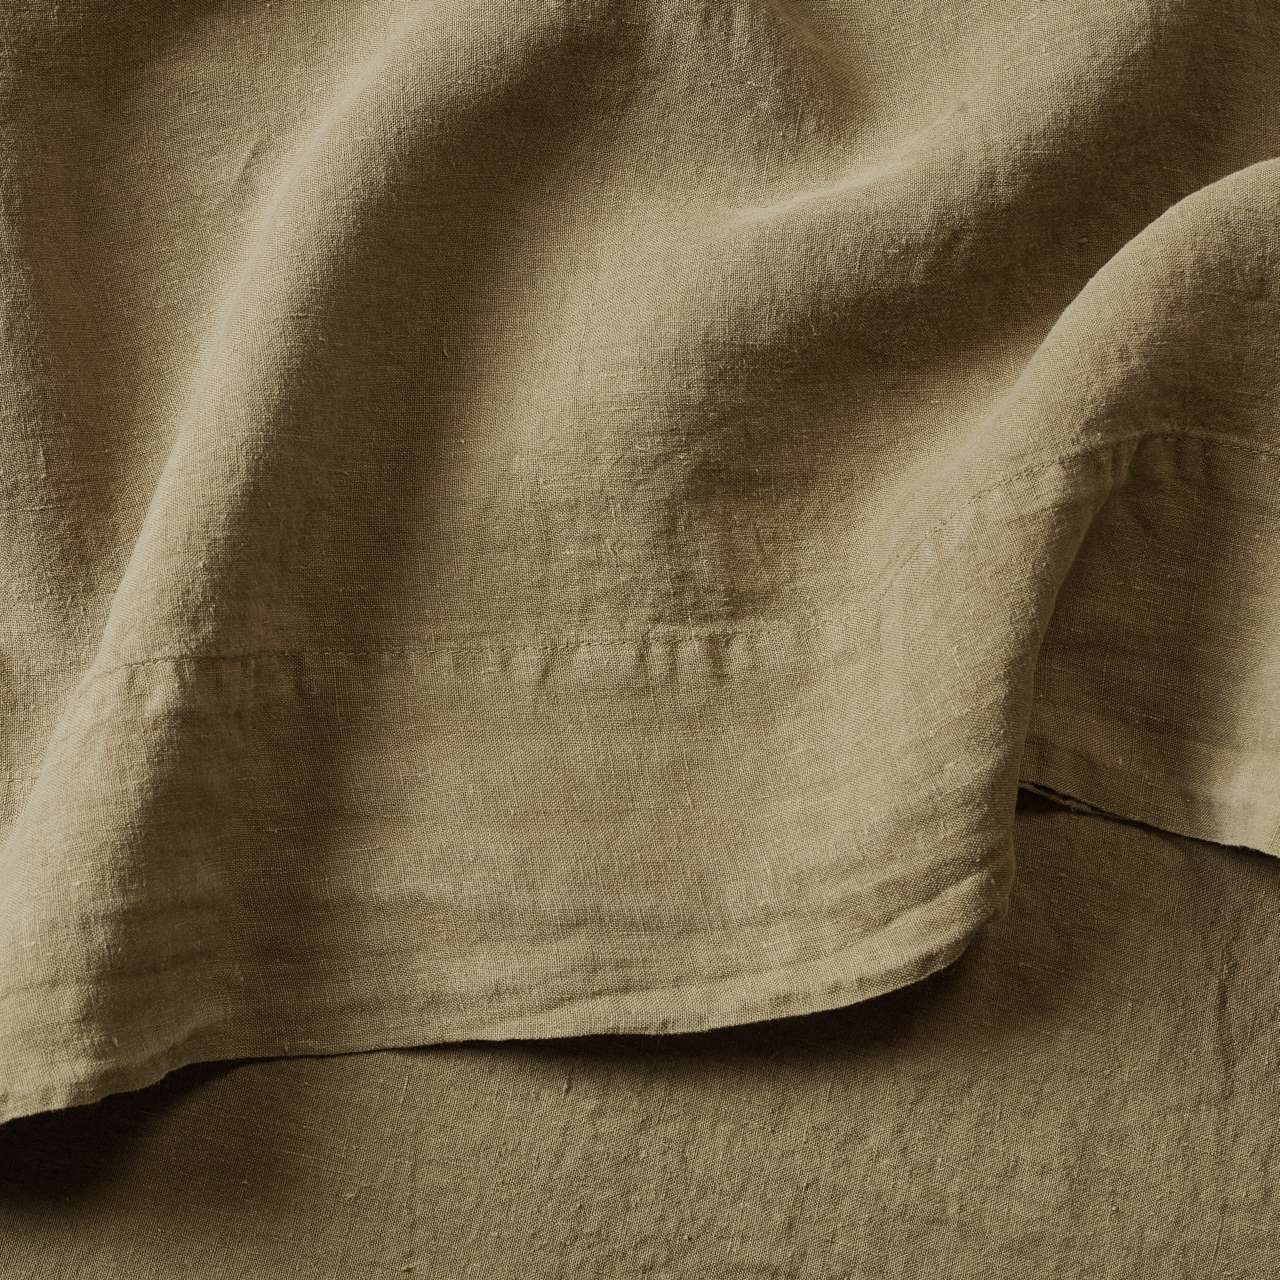 Flax Linen Bed Sheets Image 5